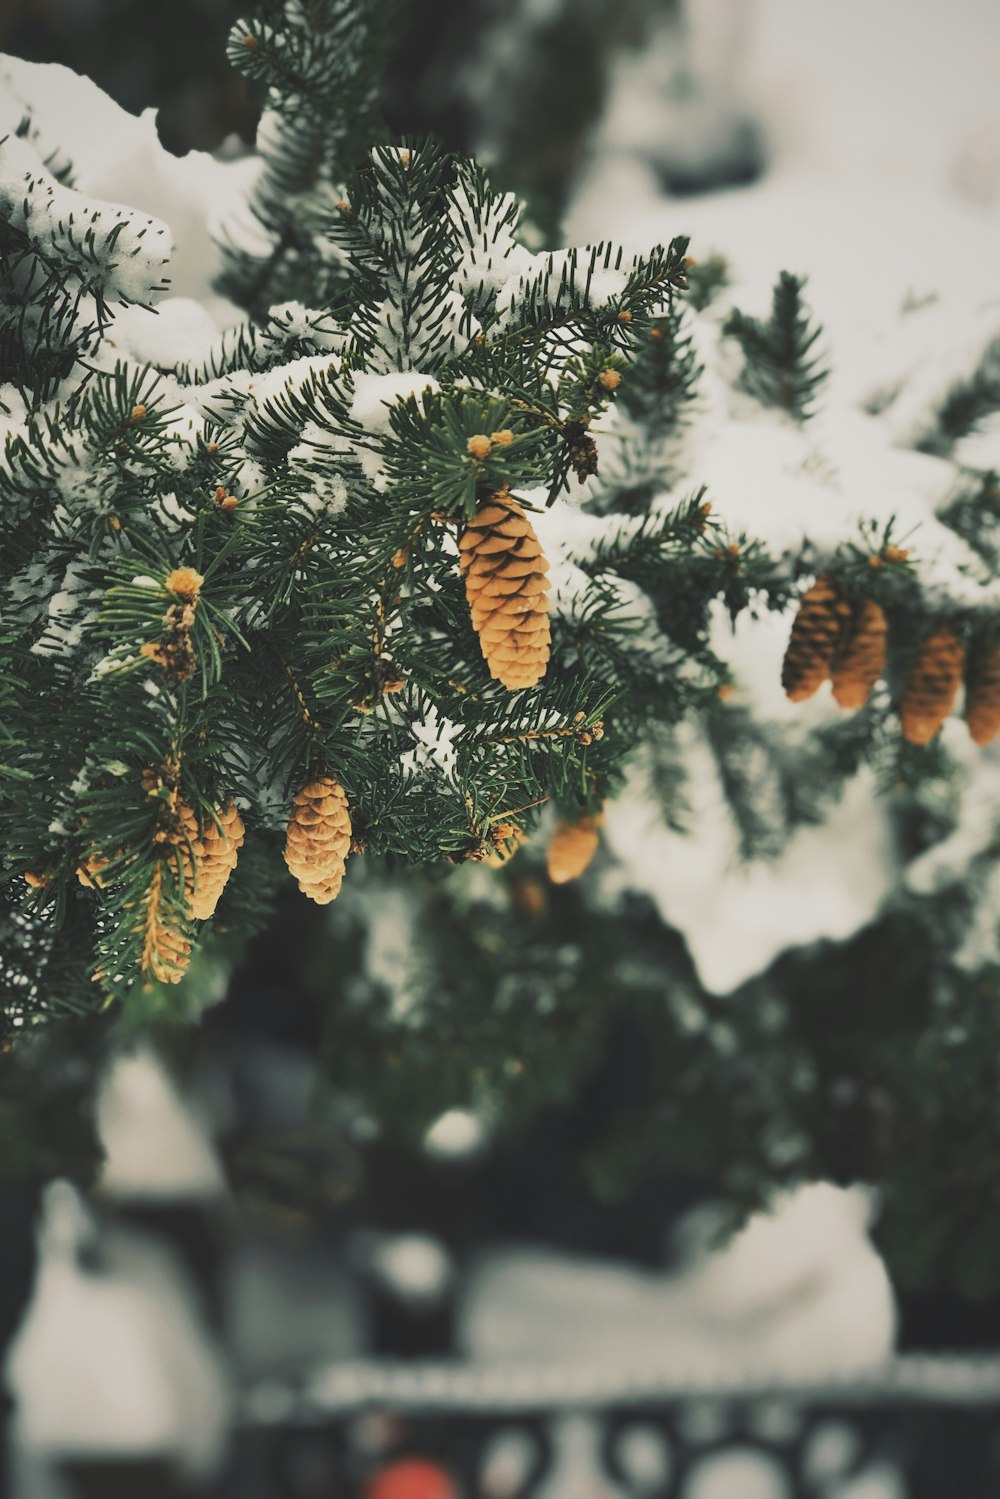 pine cones are hanging from a tree in the snow